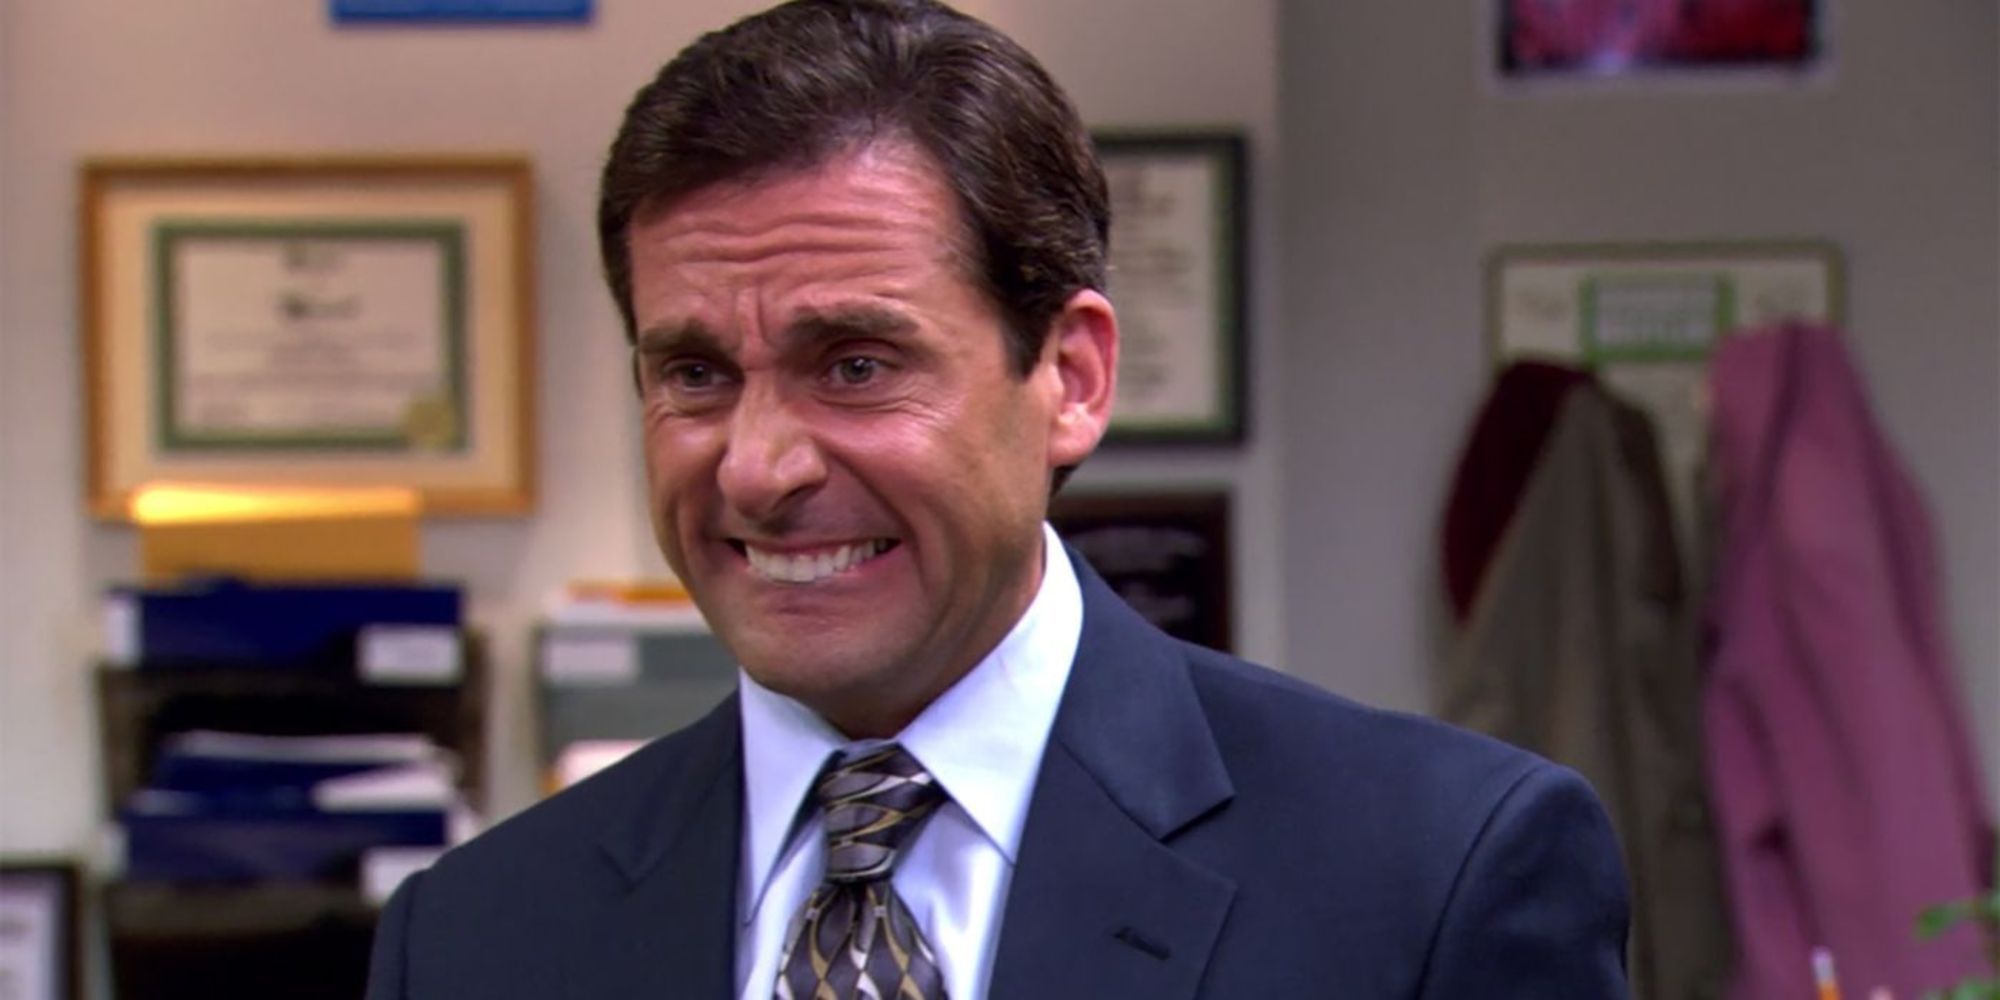 Michael Scott with an awkward smile in The Office